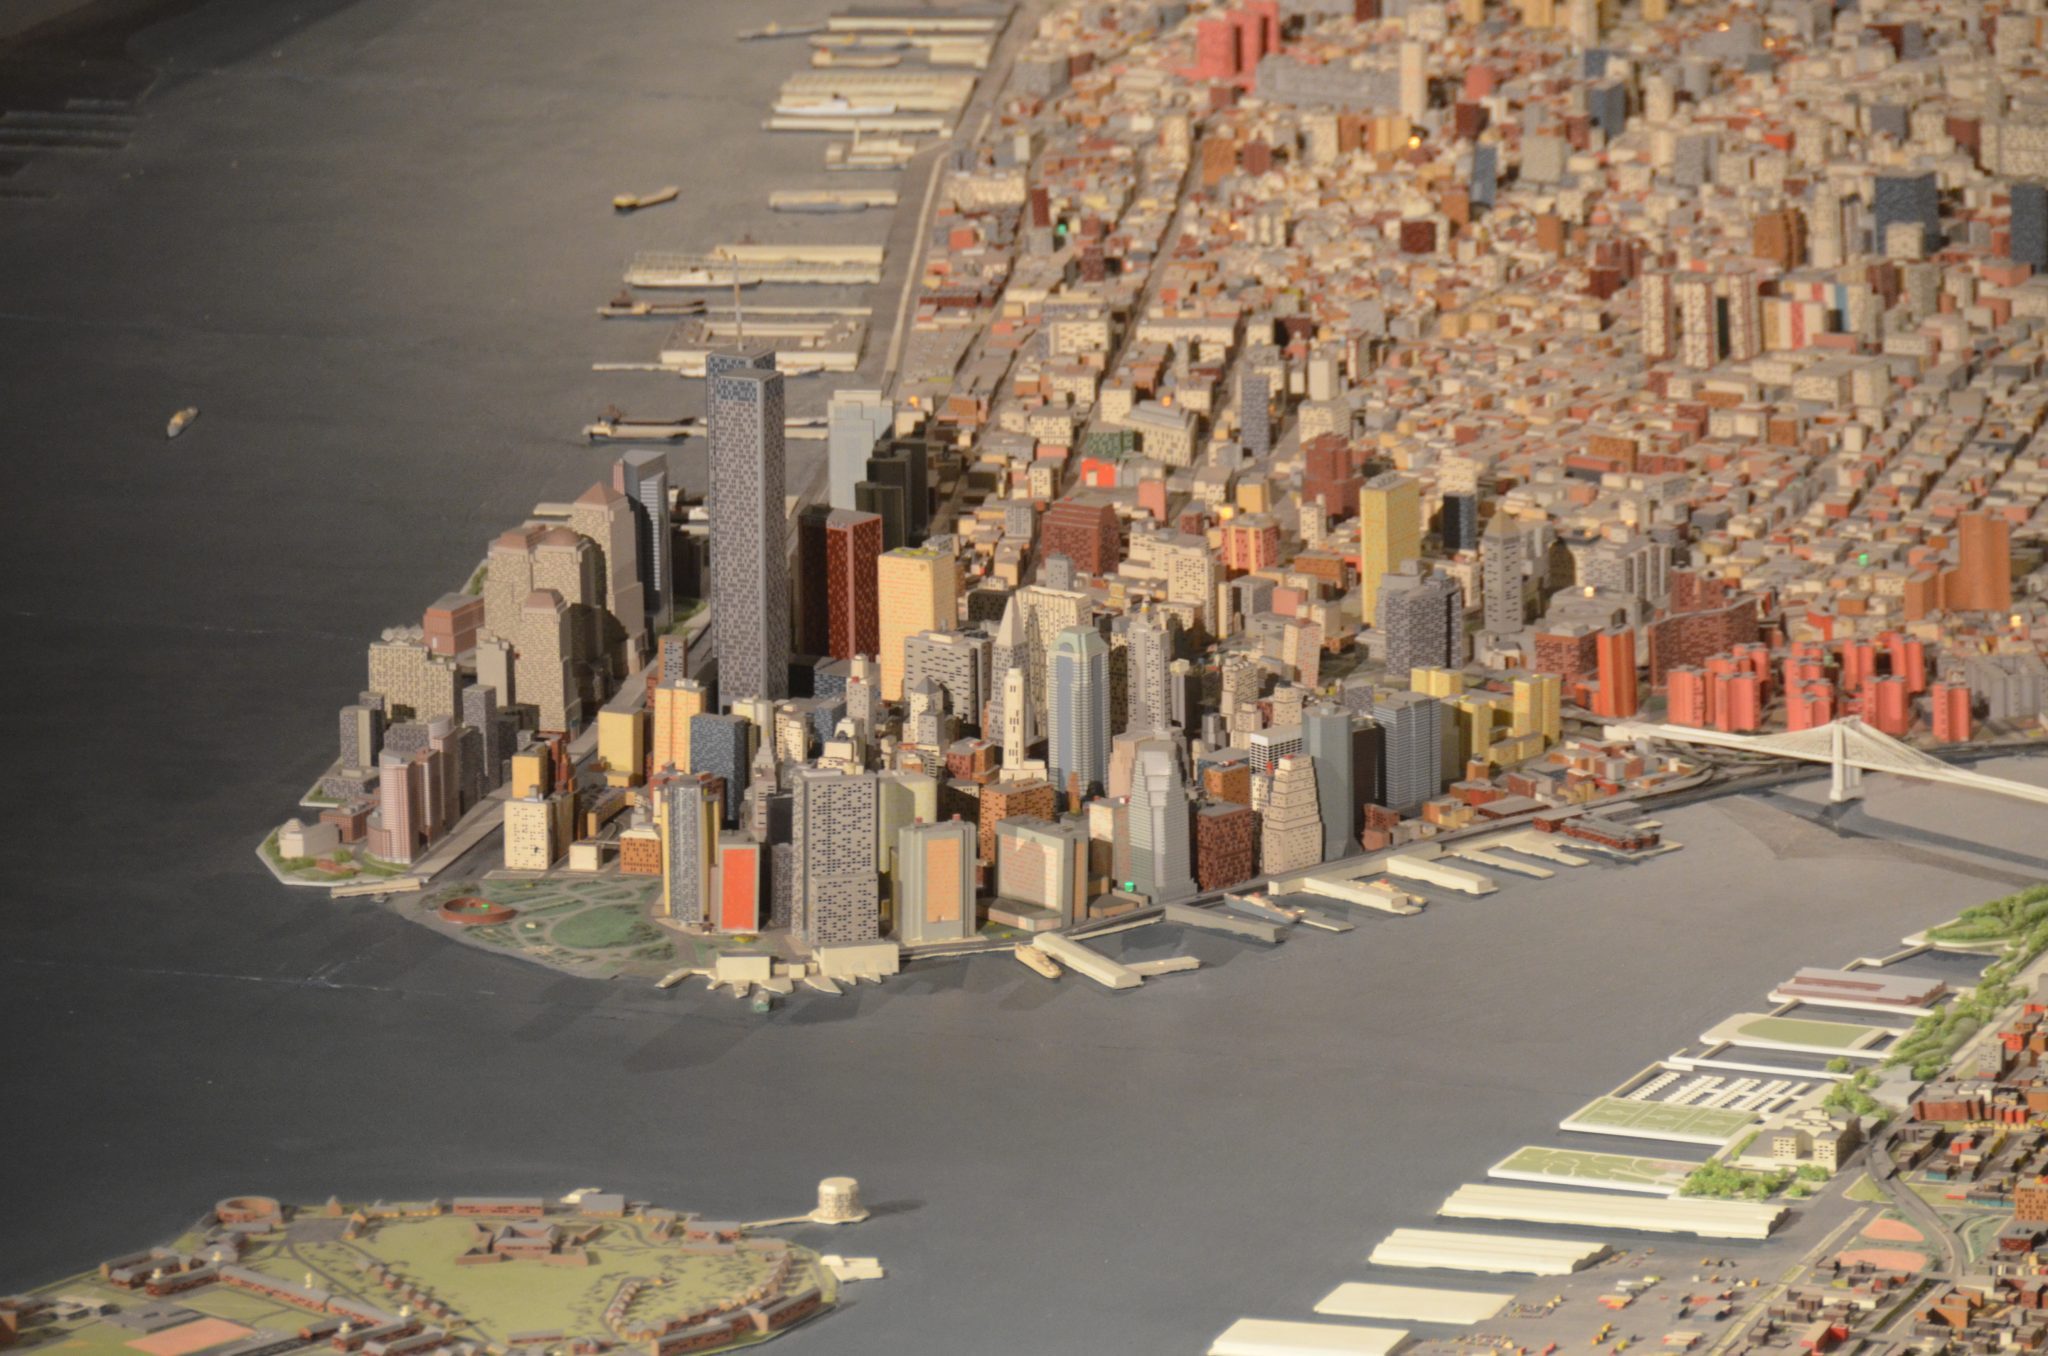 Queens Museum of Art | The Panorama of the City of New York | lower Manhattan, including the twin towers of the World Trade Center, part of the Brooklyn Bridge & Brooklyn, and Governors Island